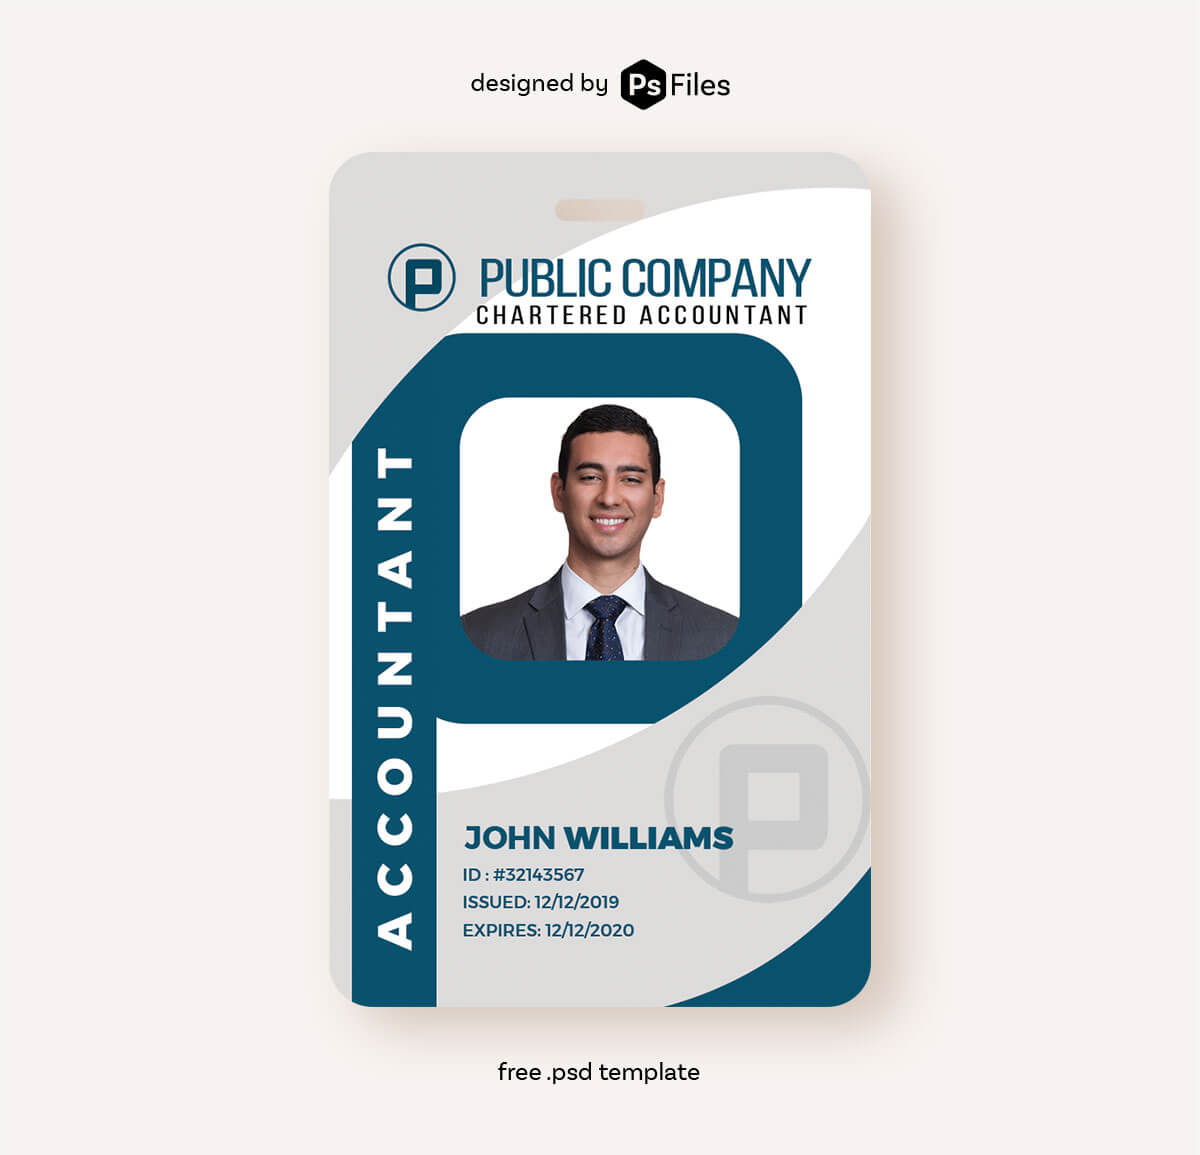 PsFiles Free Accountant Office Identity Card Design Creative PSD Template